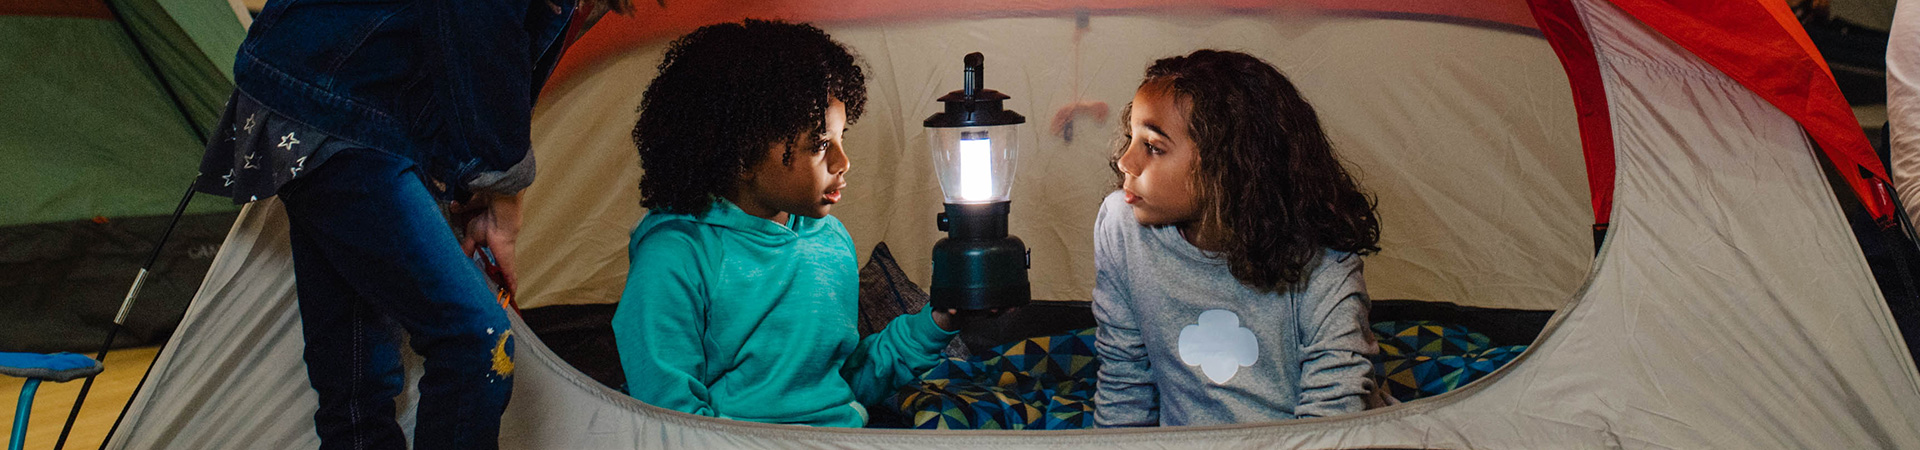  Two daisy Girl Scouts holding lantern in tent wearing trefoil shirt 